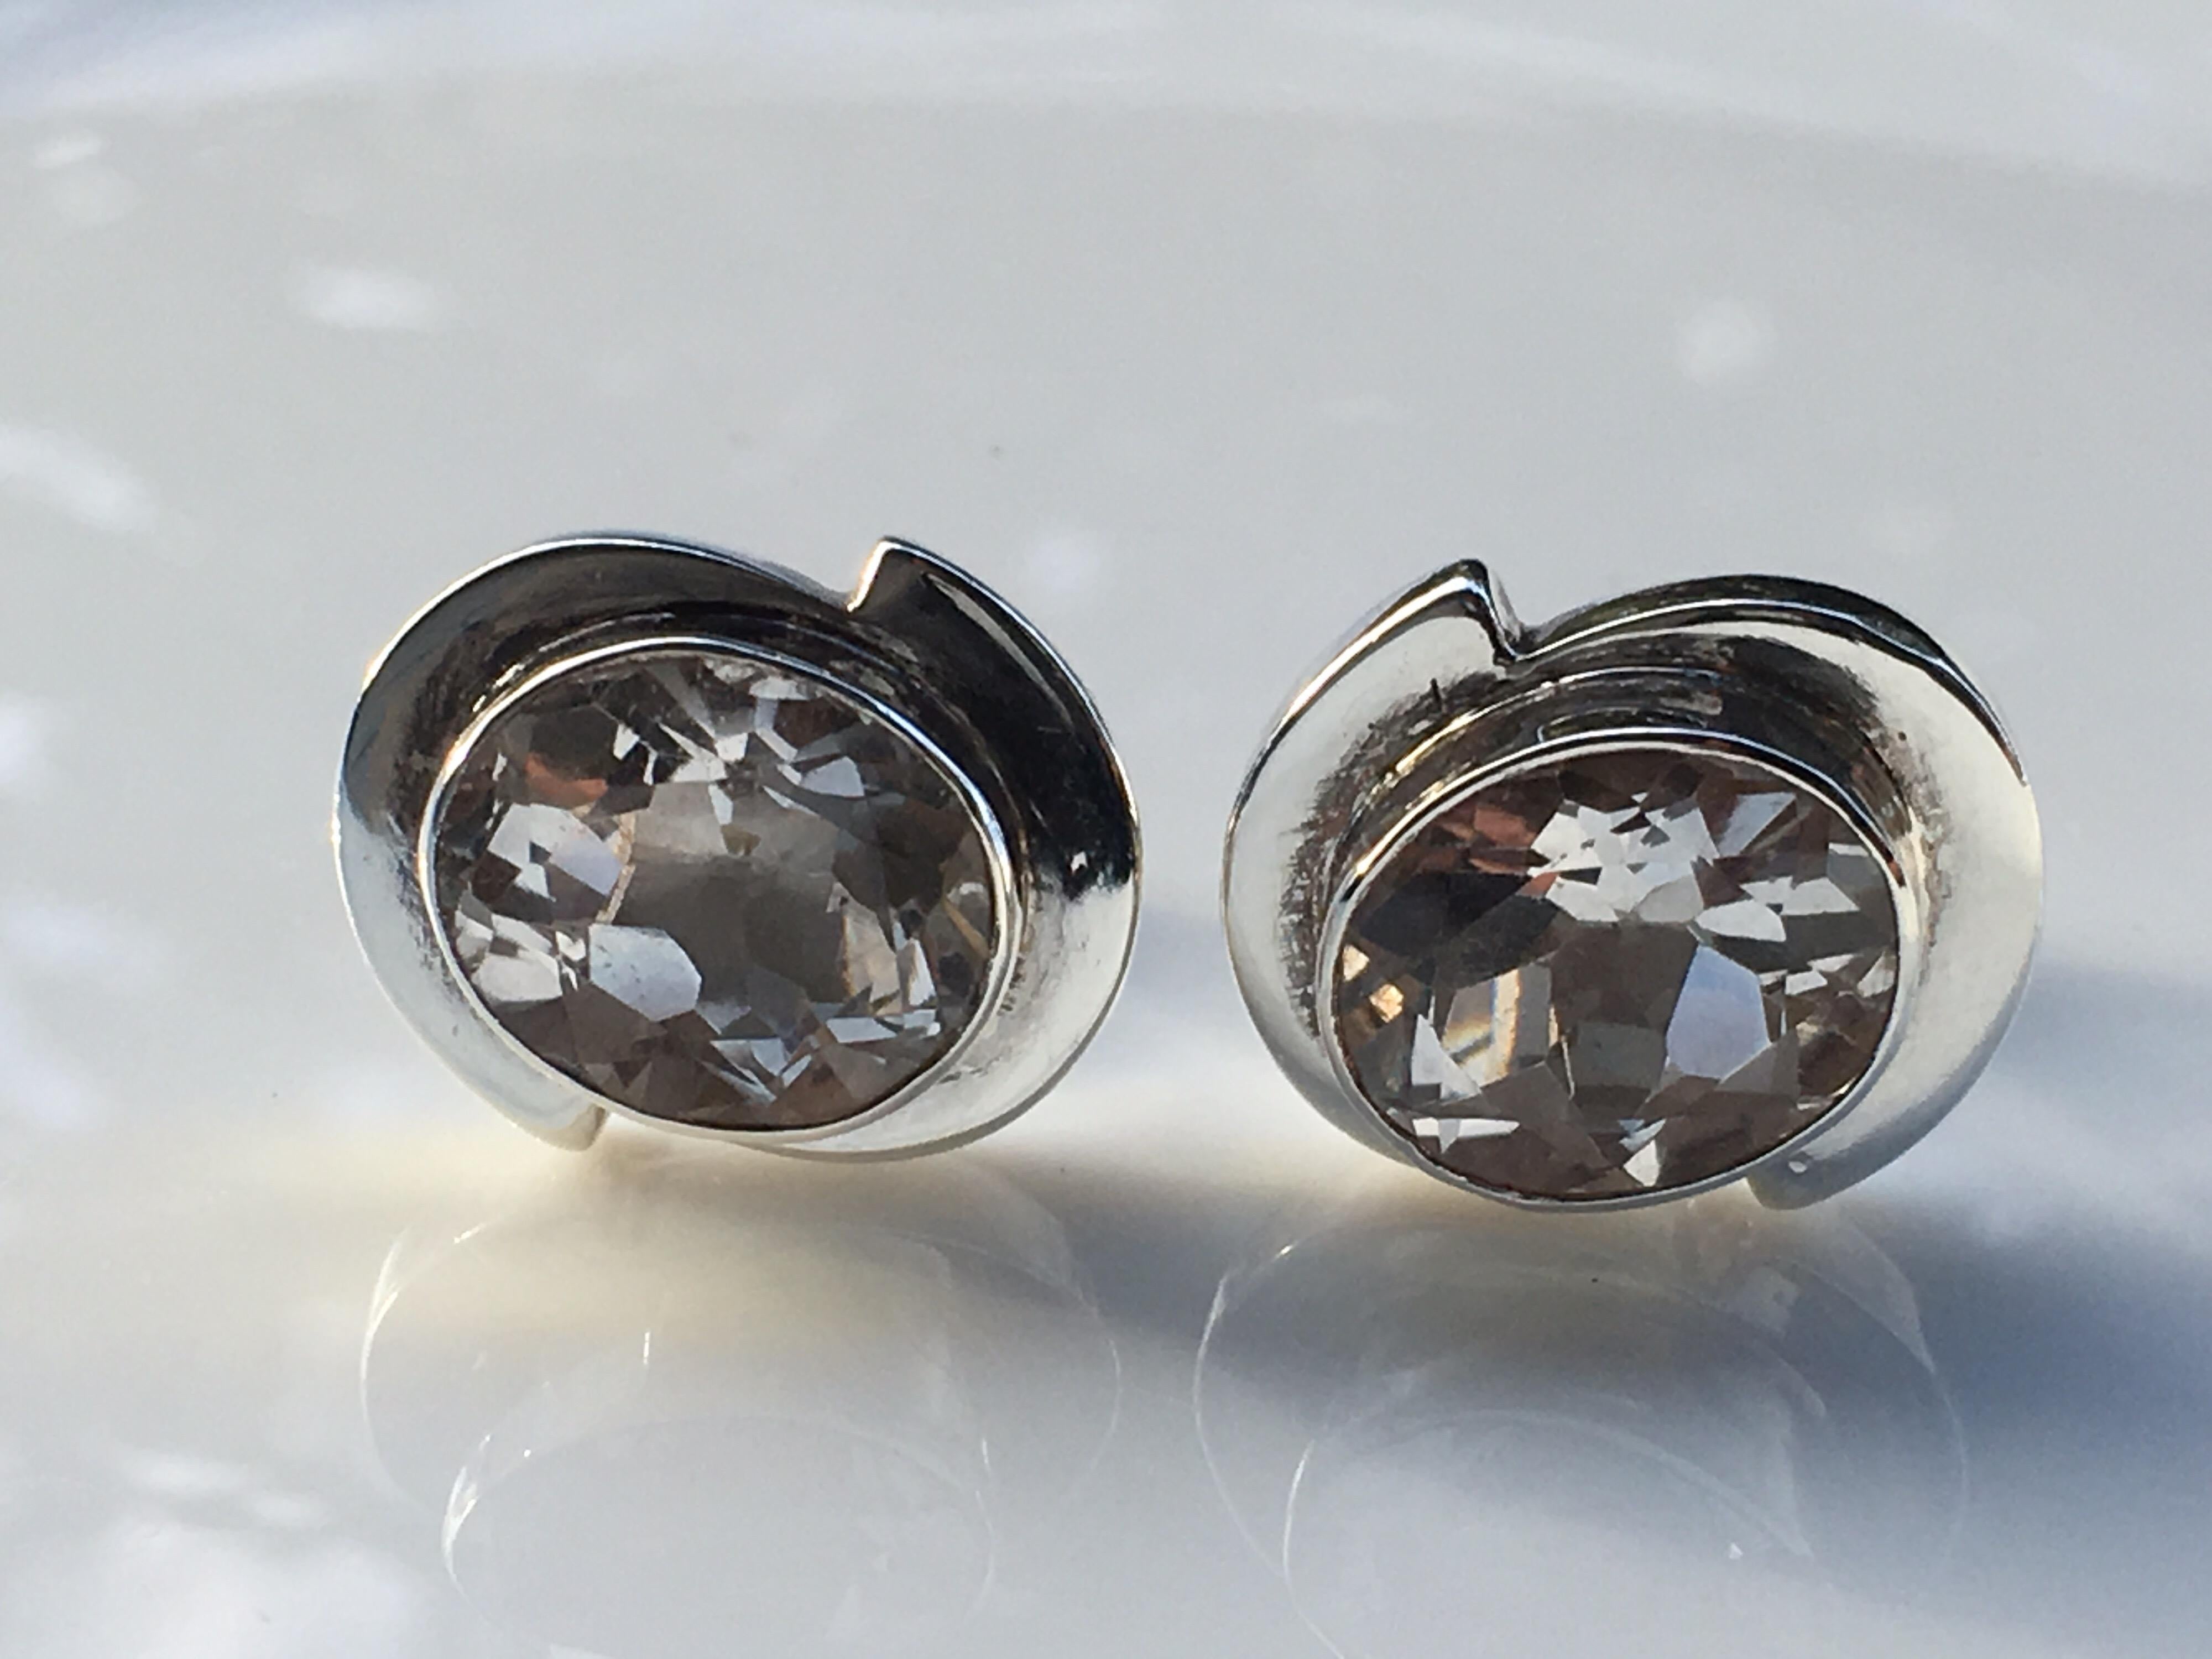 Natural Rock Crystal set in sterling silver Handcrafted cufflinks is 10.30 Gram and stones weight approx 5 carat.
Crystal is 8 MM x 10 MM. 